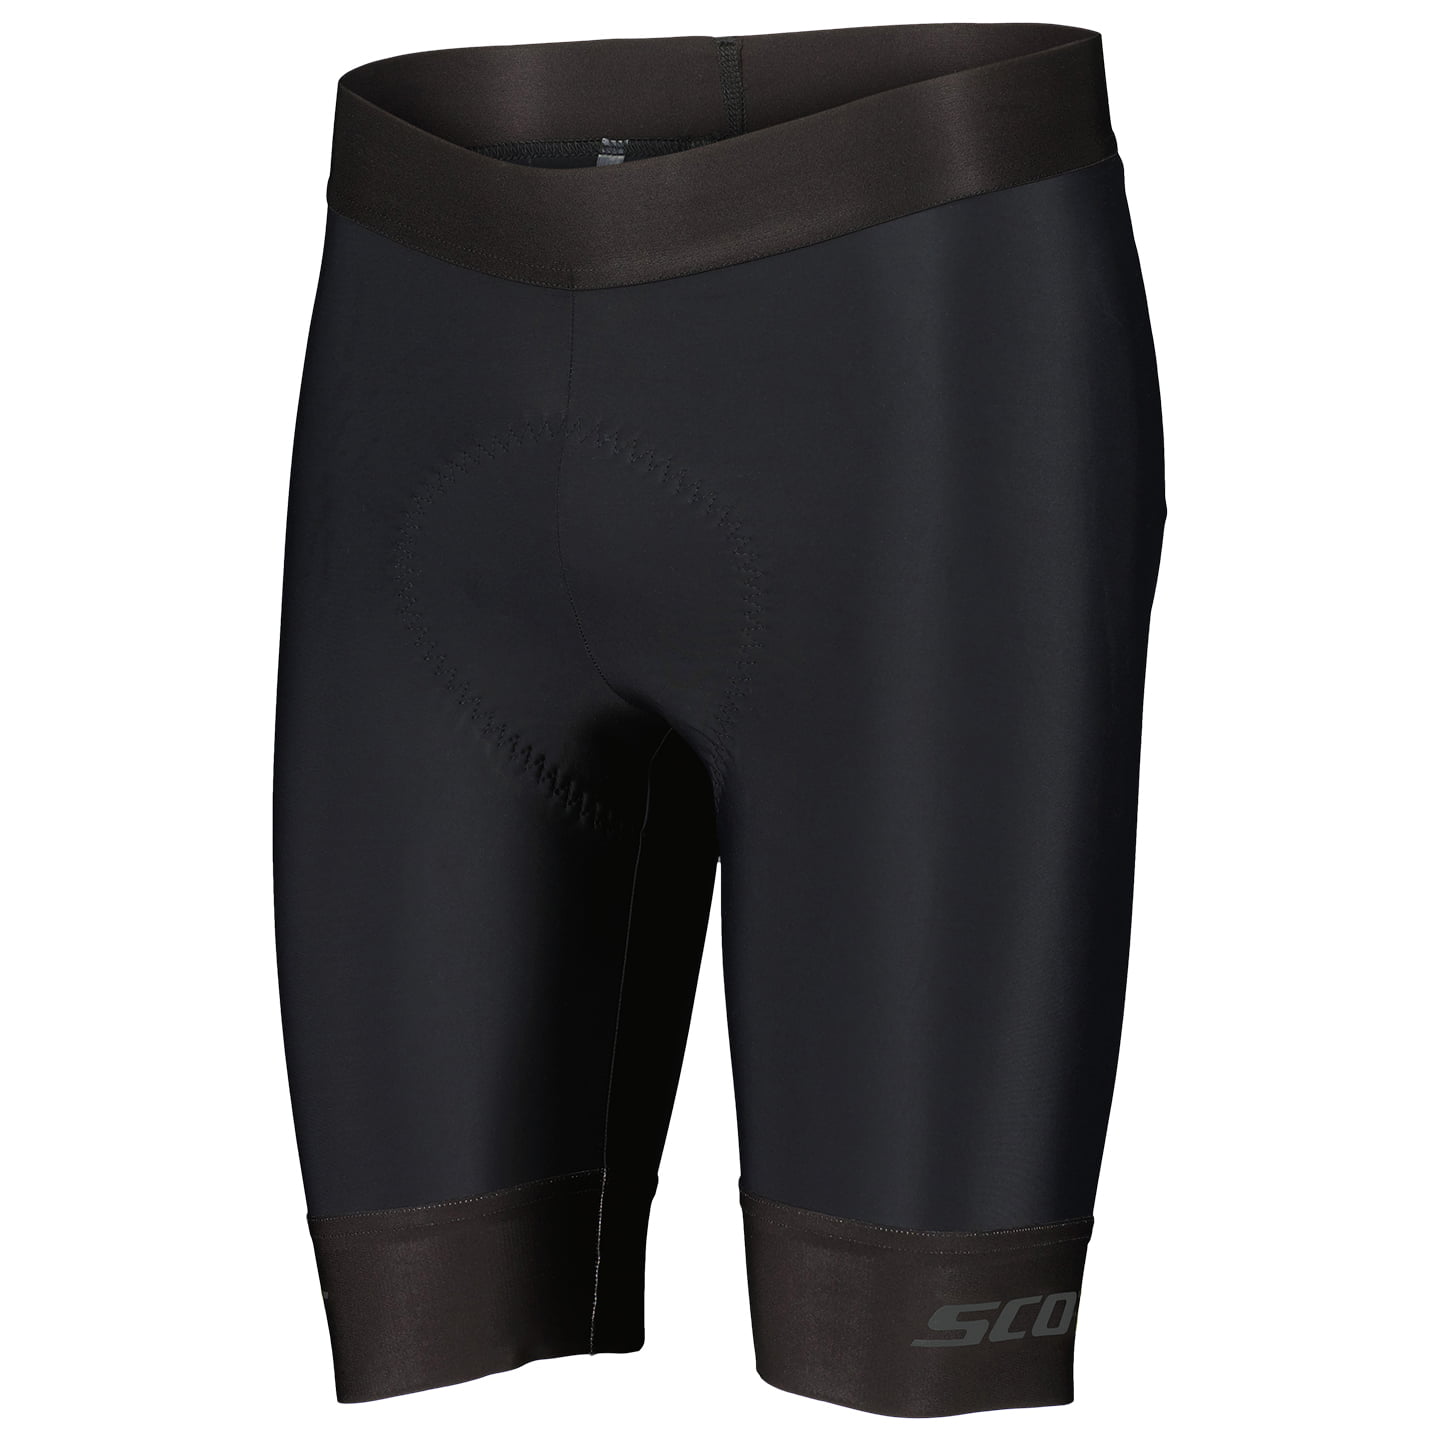 RC Pro Cycling Shorts Cycling Shorts, for men, size S, Cycle trousers, Cycle clothing